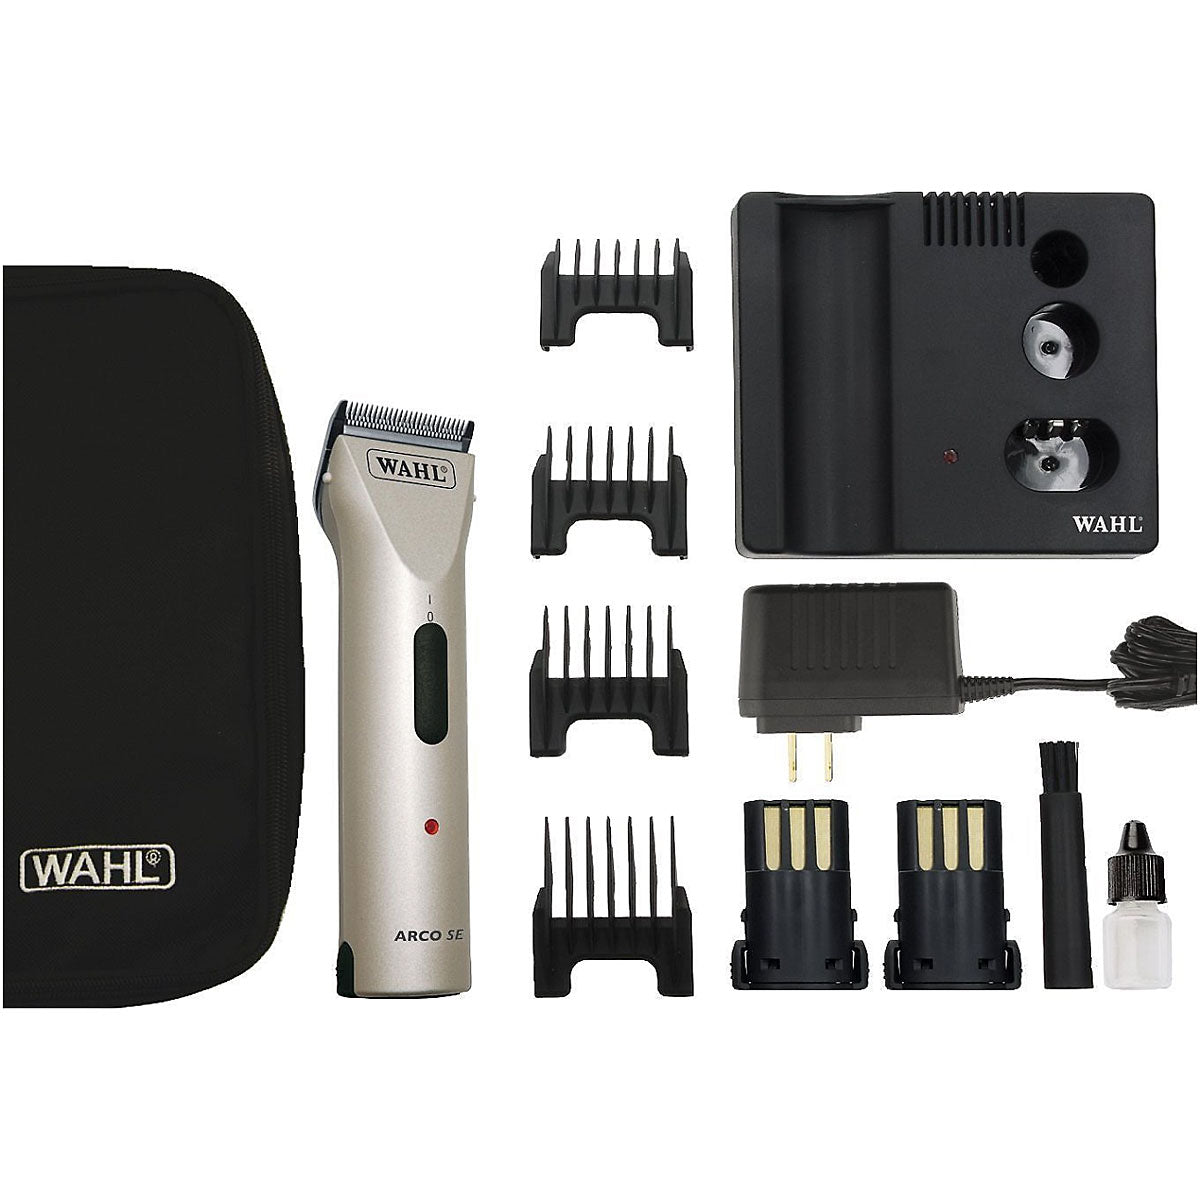 Wahl Arco Cordless Pet Clipper Kit - Champagne